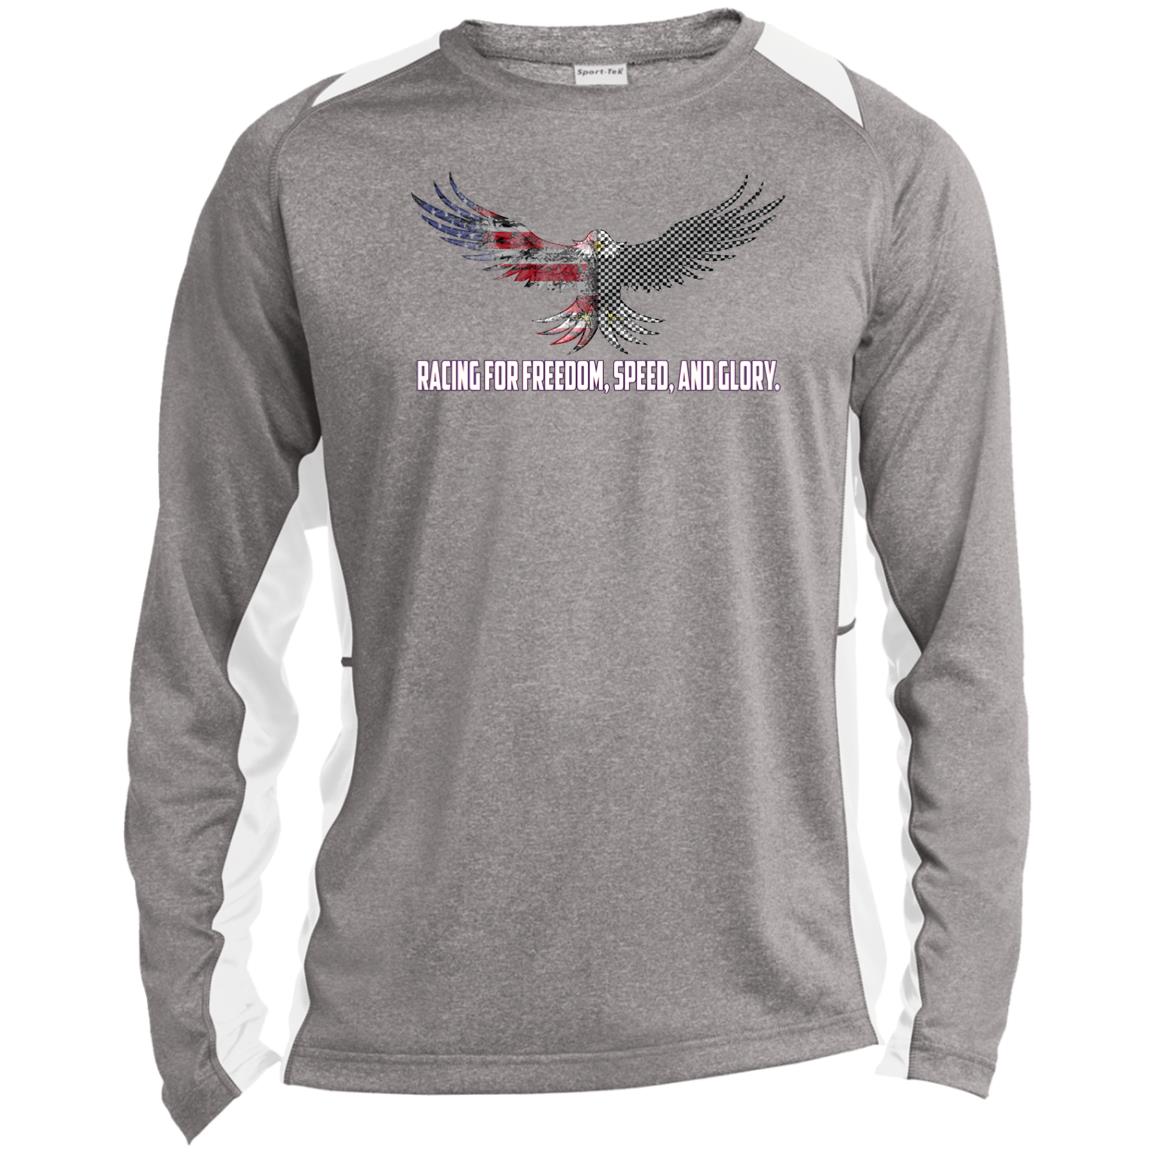 Racing For Freedom, Speed, And Glory Long Sleeve Heather Colorblock Performance Tee